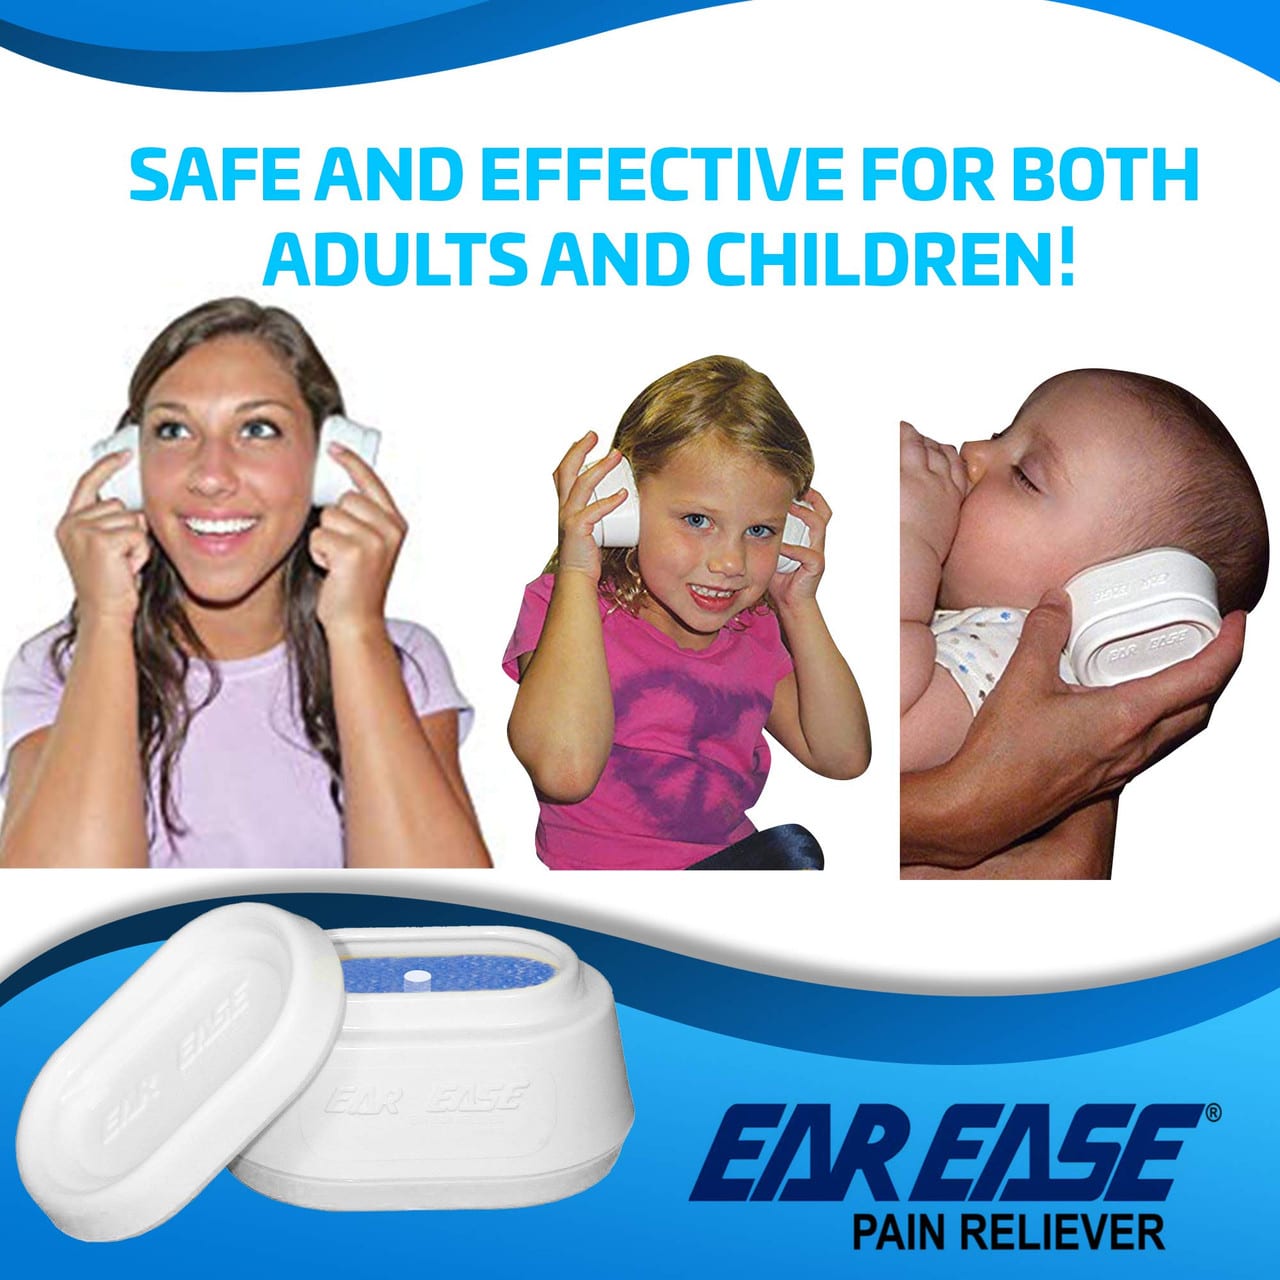 Ear Ease Pain Reliever for Adults, Children &  Senior Citizens